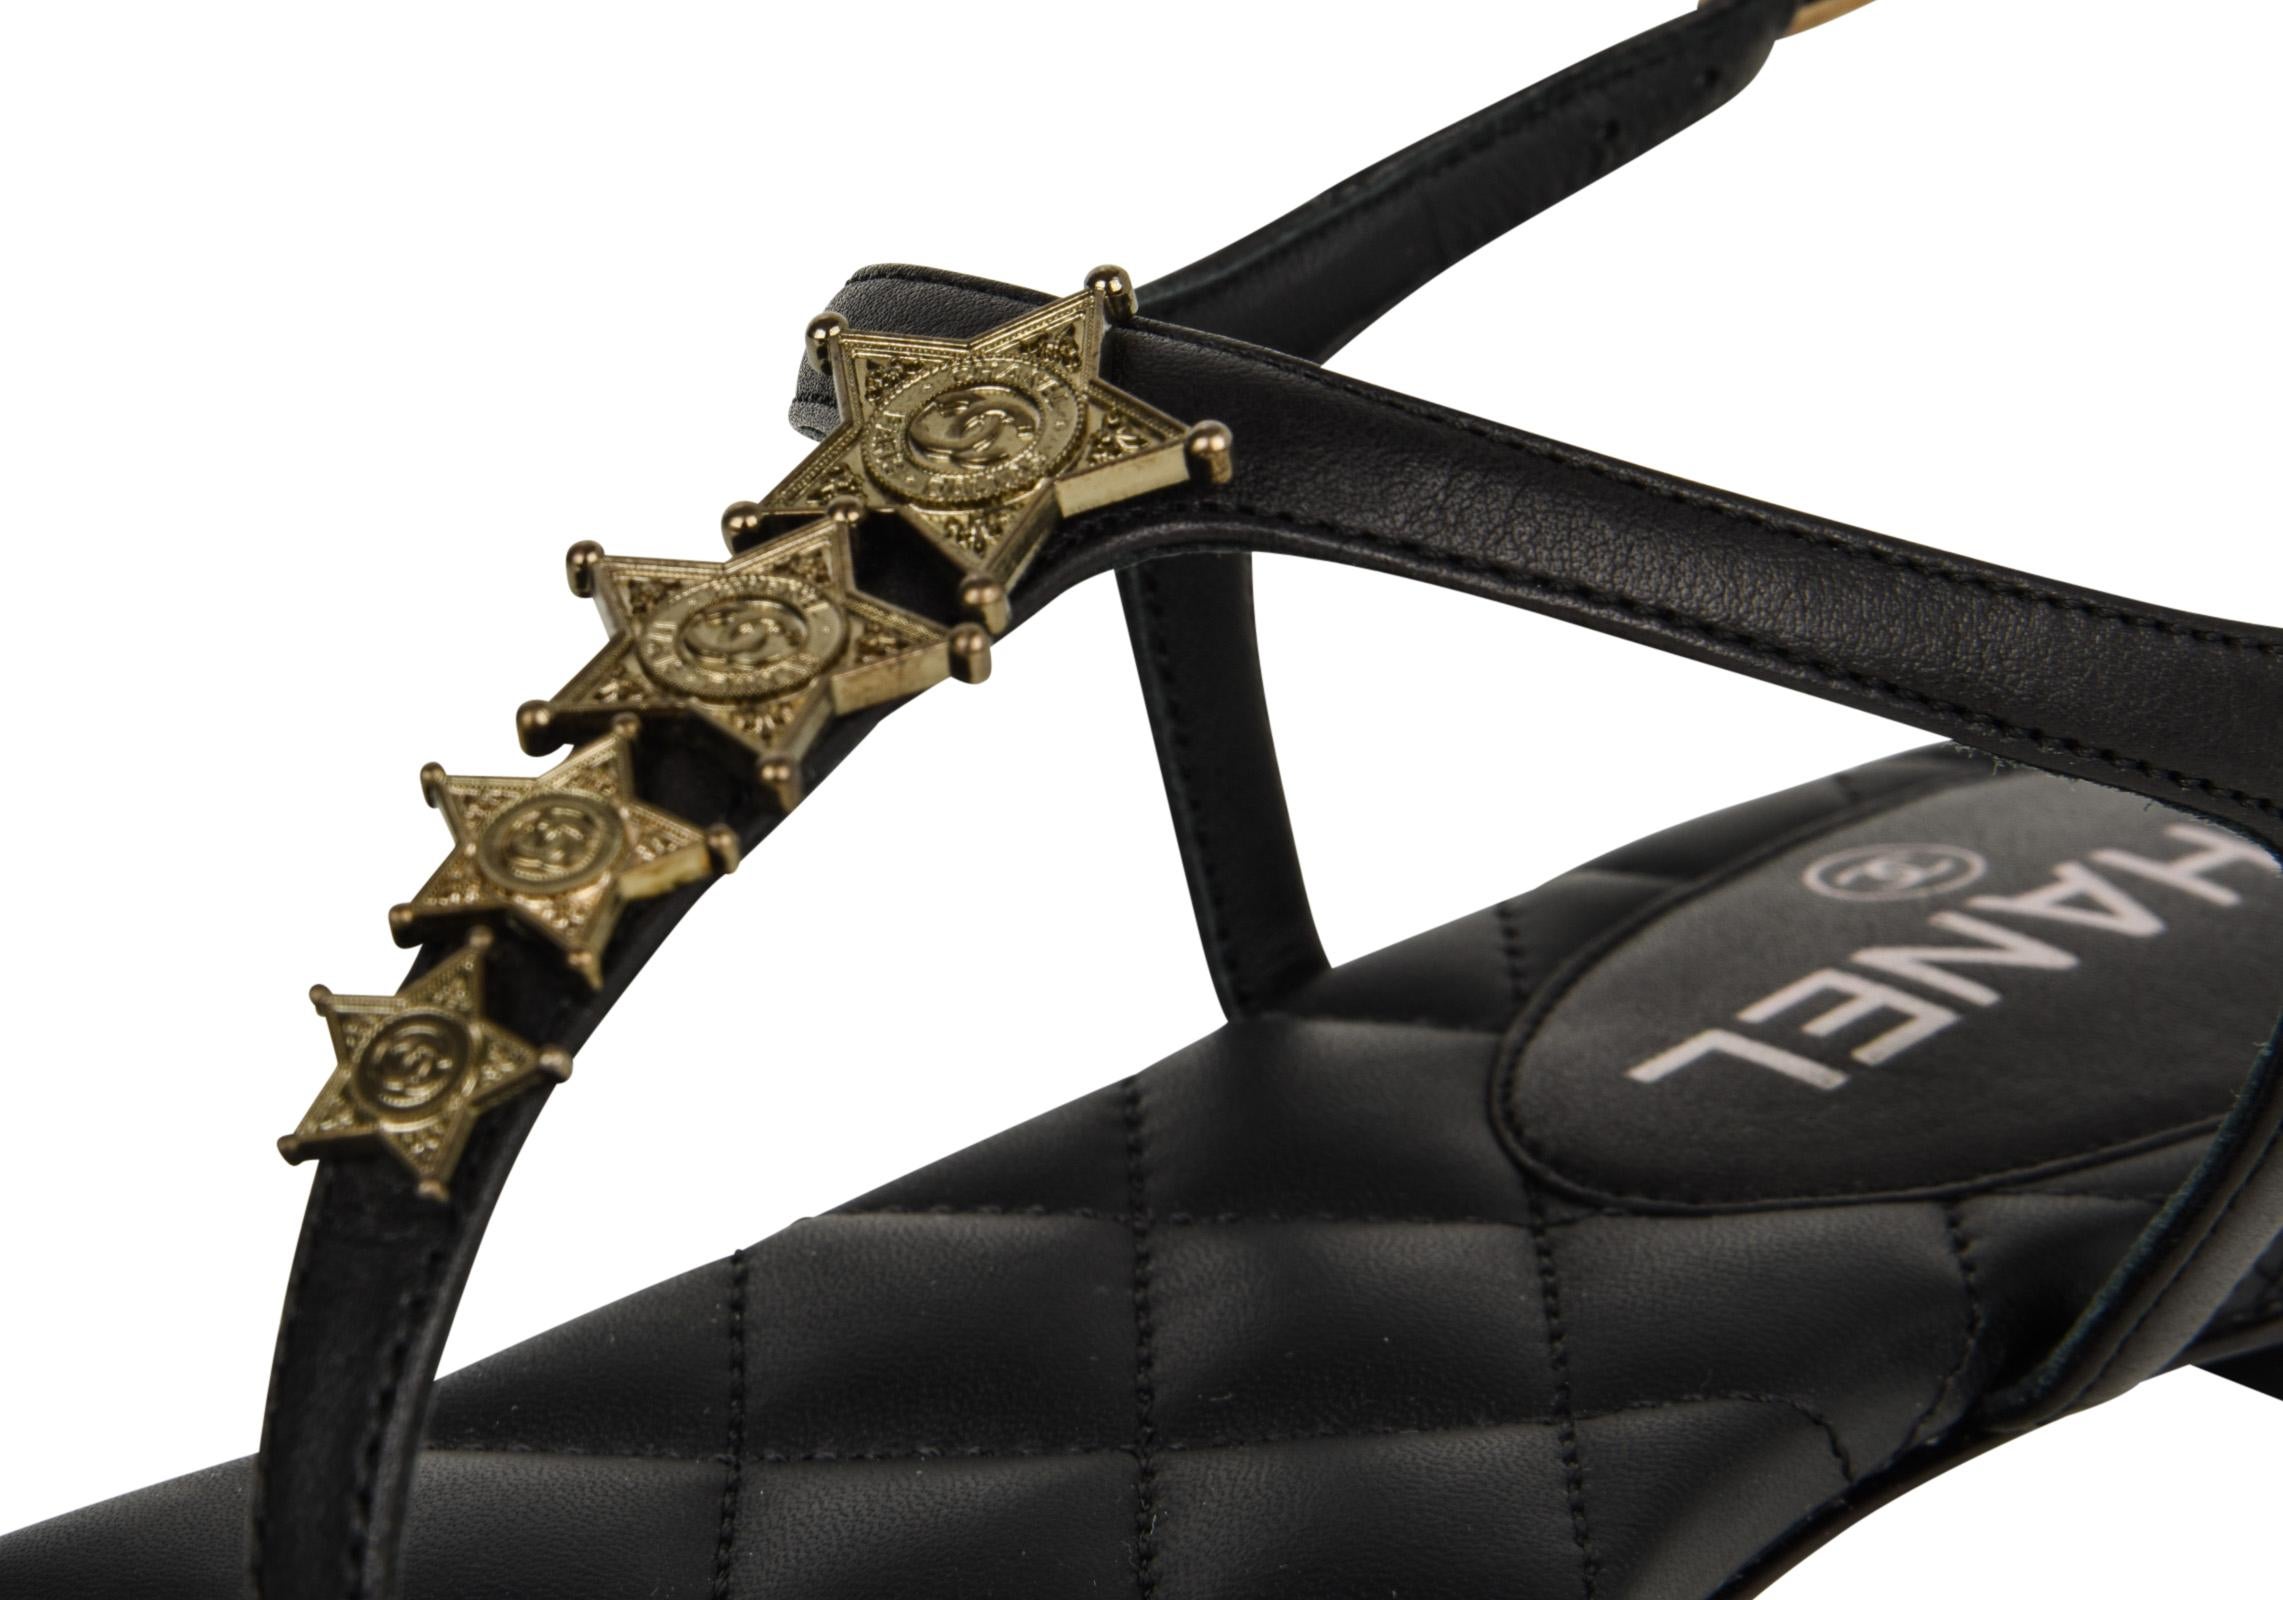 Guaranteed  authentic Chanel CC Star black leather T-strap thong flat sandal. 
Perfect summer sandal with 4 logo embossed stars across the T-strap.
Black signature quilted insole.
Embossed side buckle.
Comes with box and sleeper.
NEW or NEVER WORN

